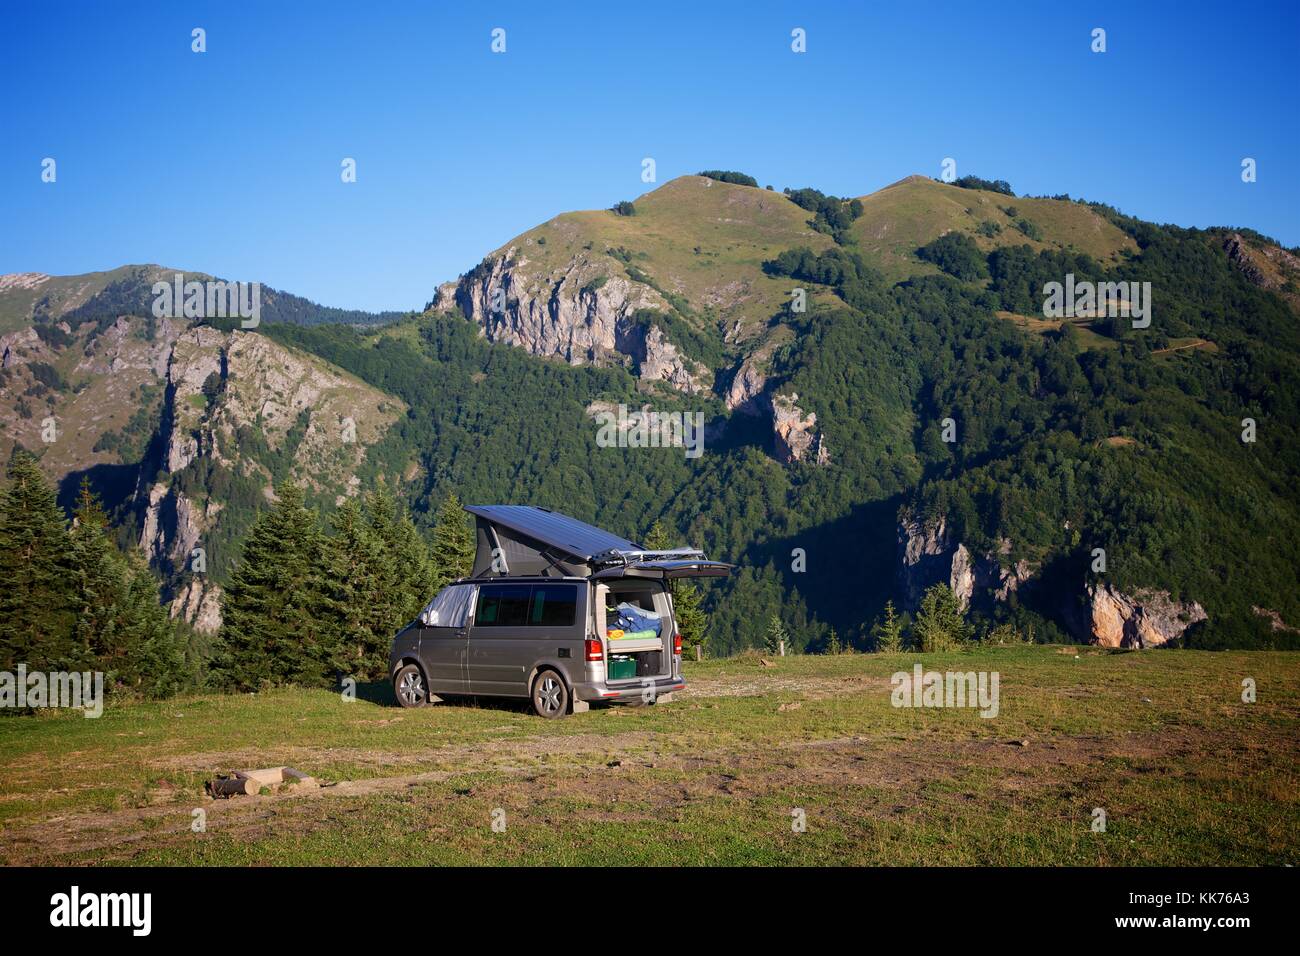 A female camper returning to her motorhome in a field high on a hill above the Rugova Valley Kosovo on a bright sunny day. Stock Photo